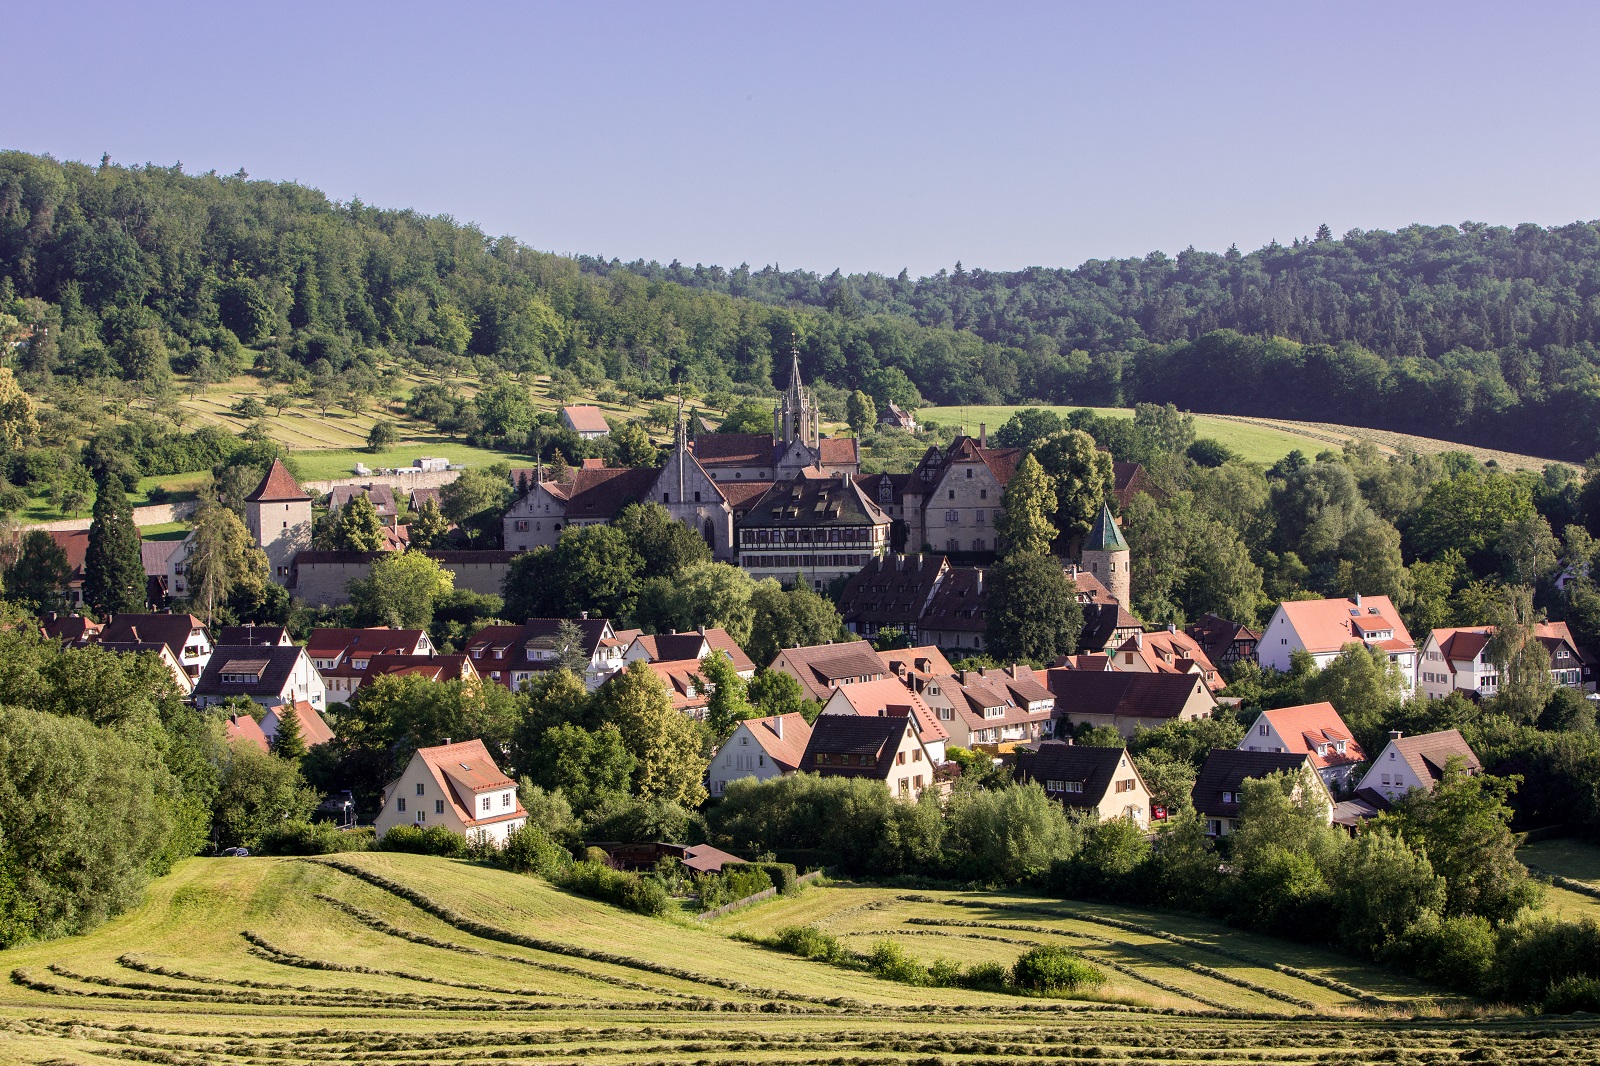 Bebenhausen and the Bebenhausen Monastery in the foreground, meadows and forests in the background